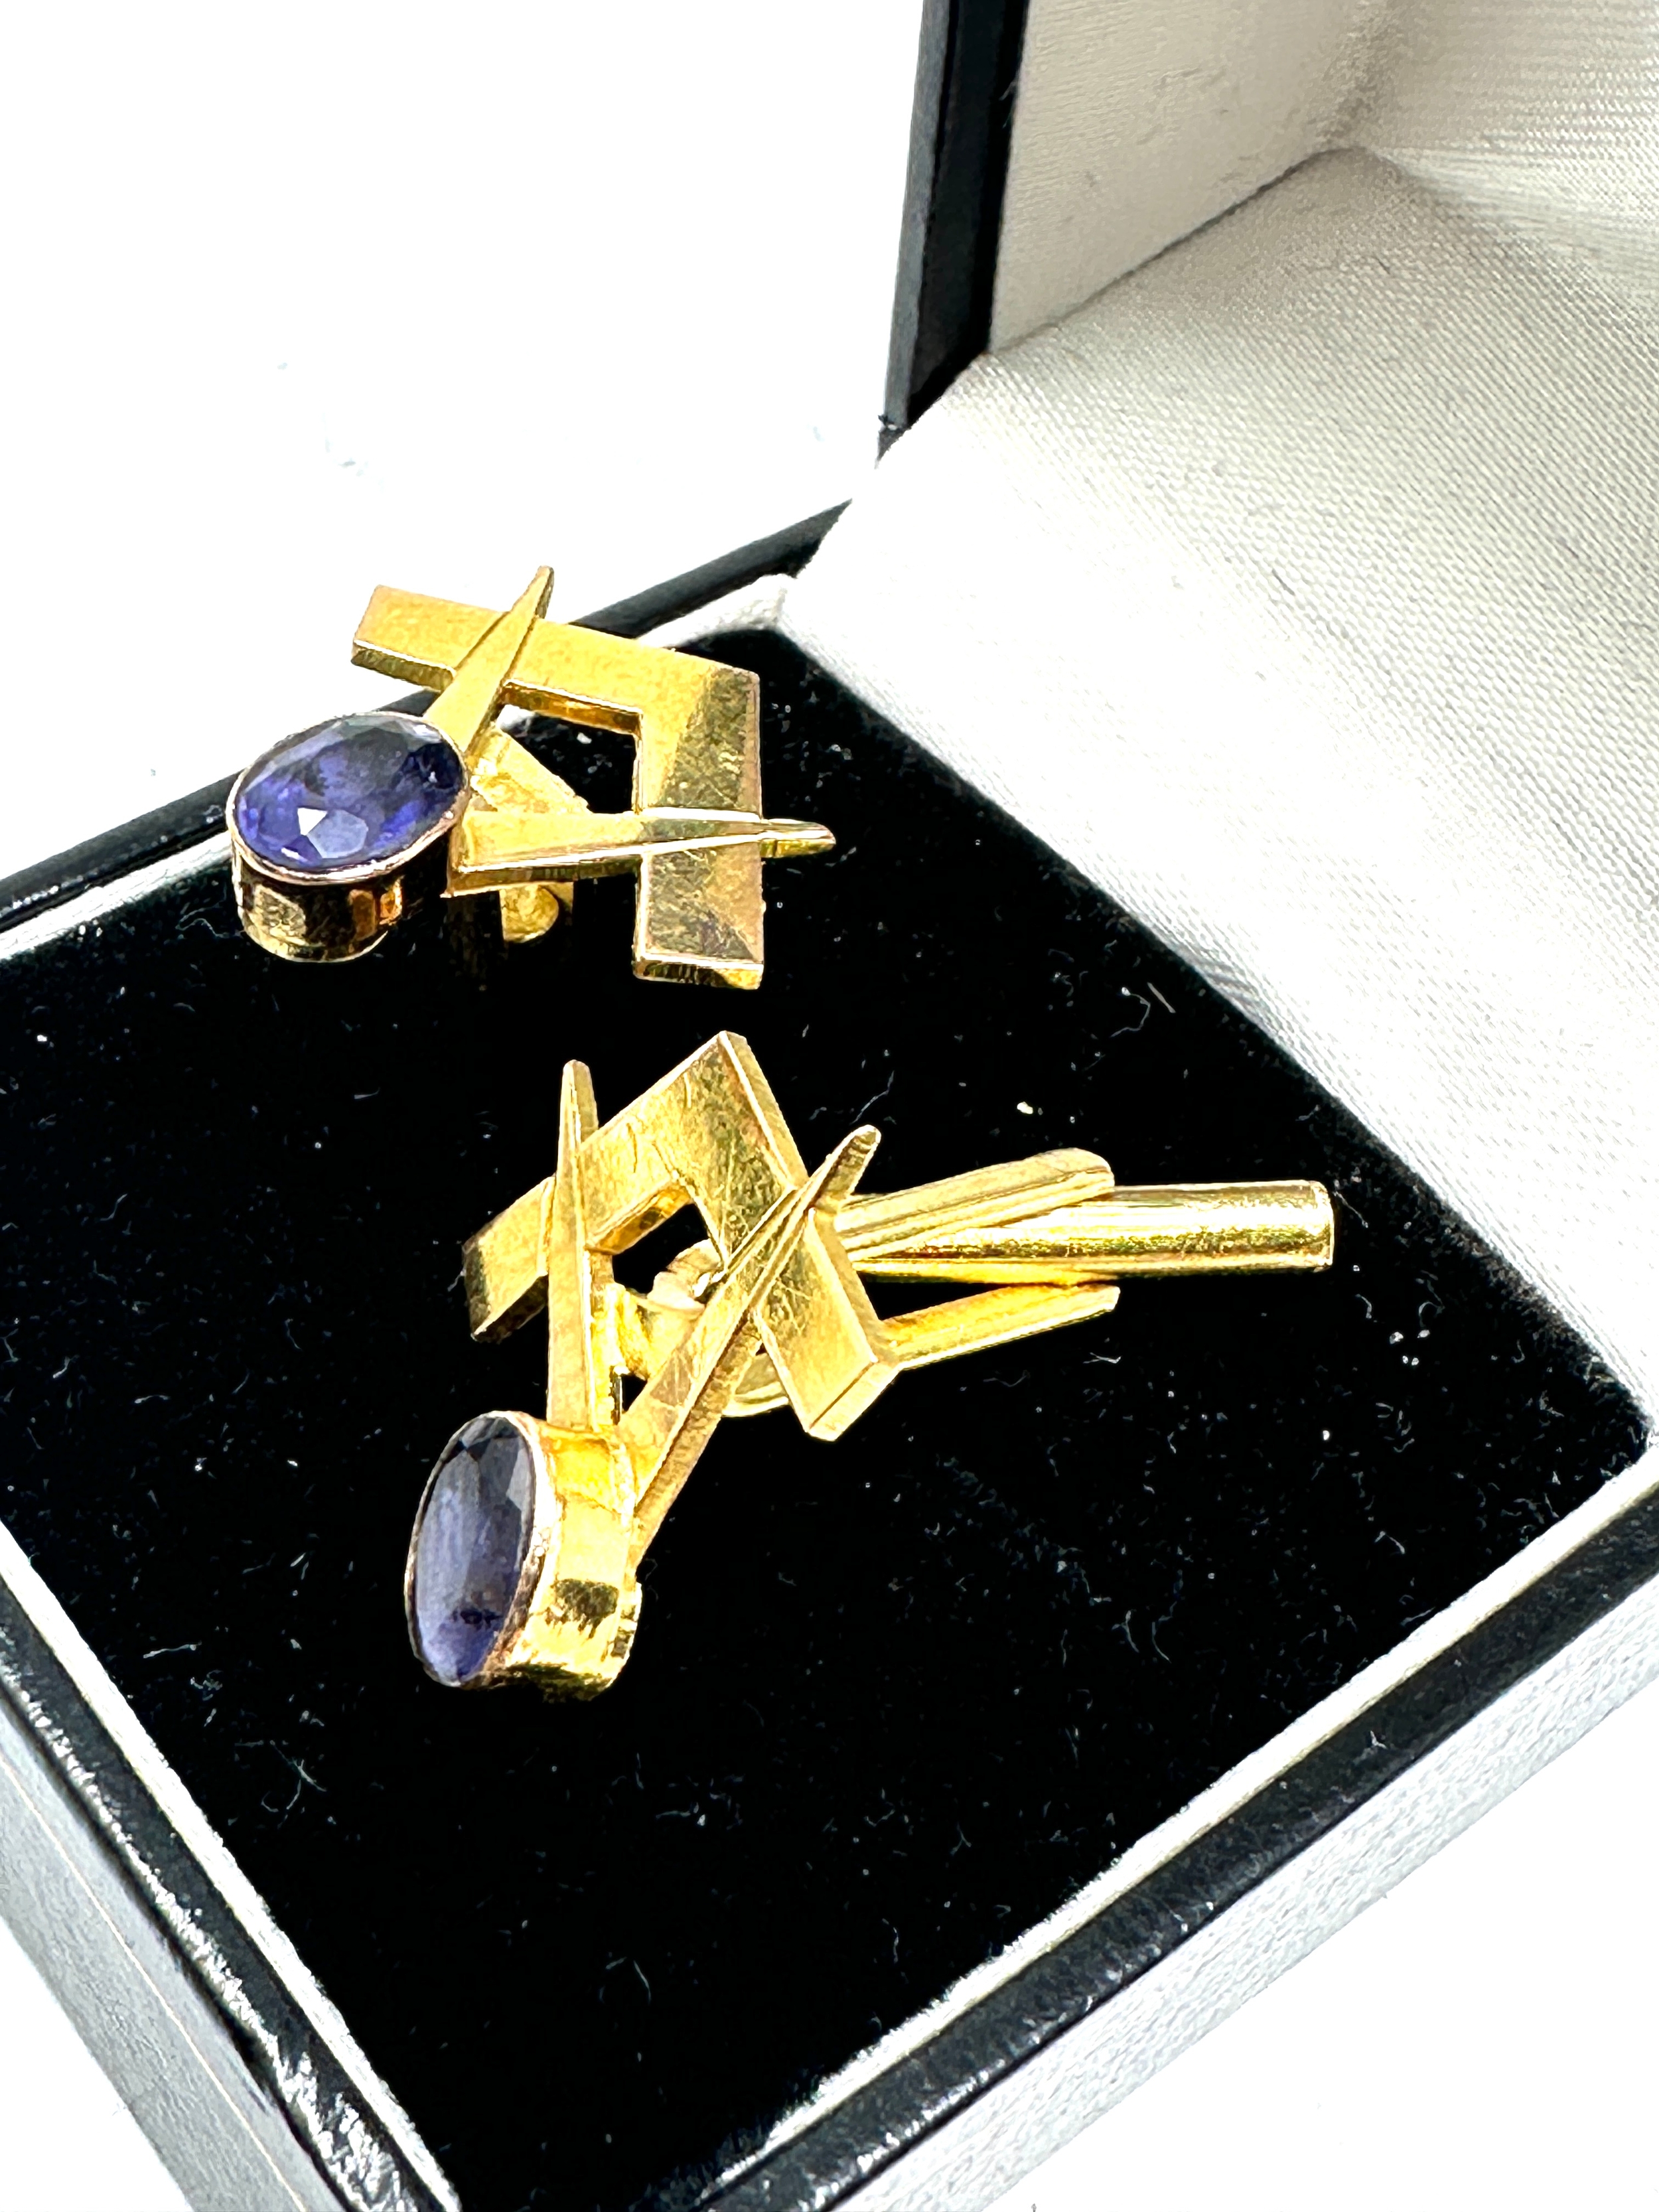 18ct gold & sapphire masonic cufflinks weight 5.5g xrt tested as 18ct gold - Image 2 of 3